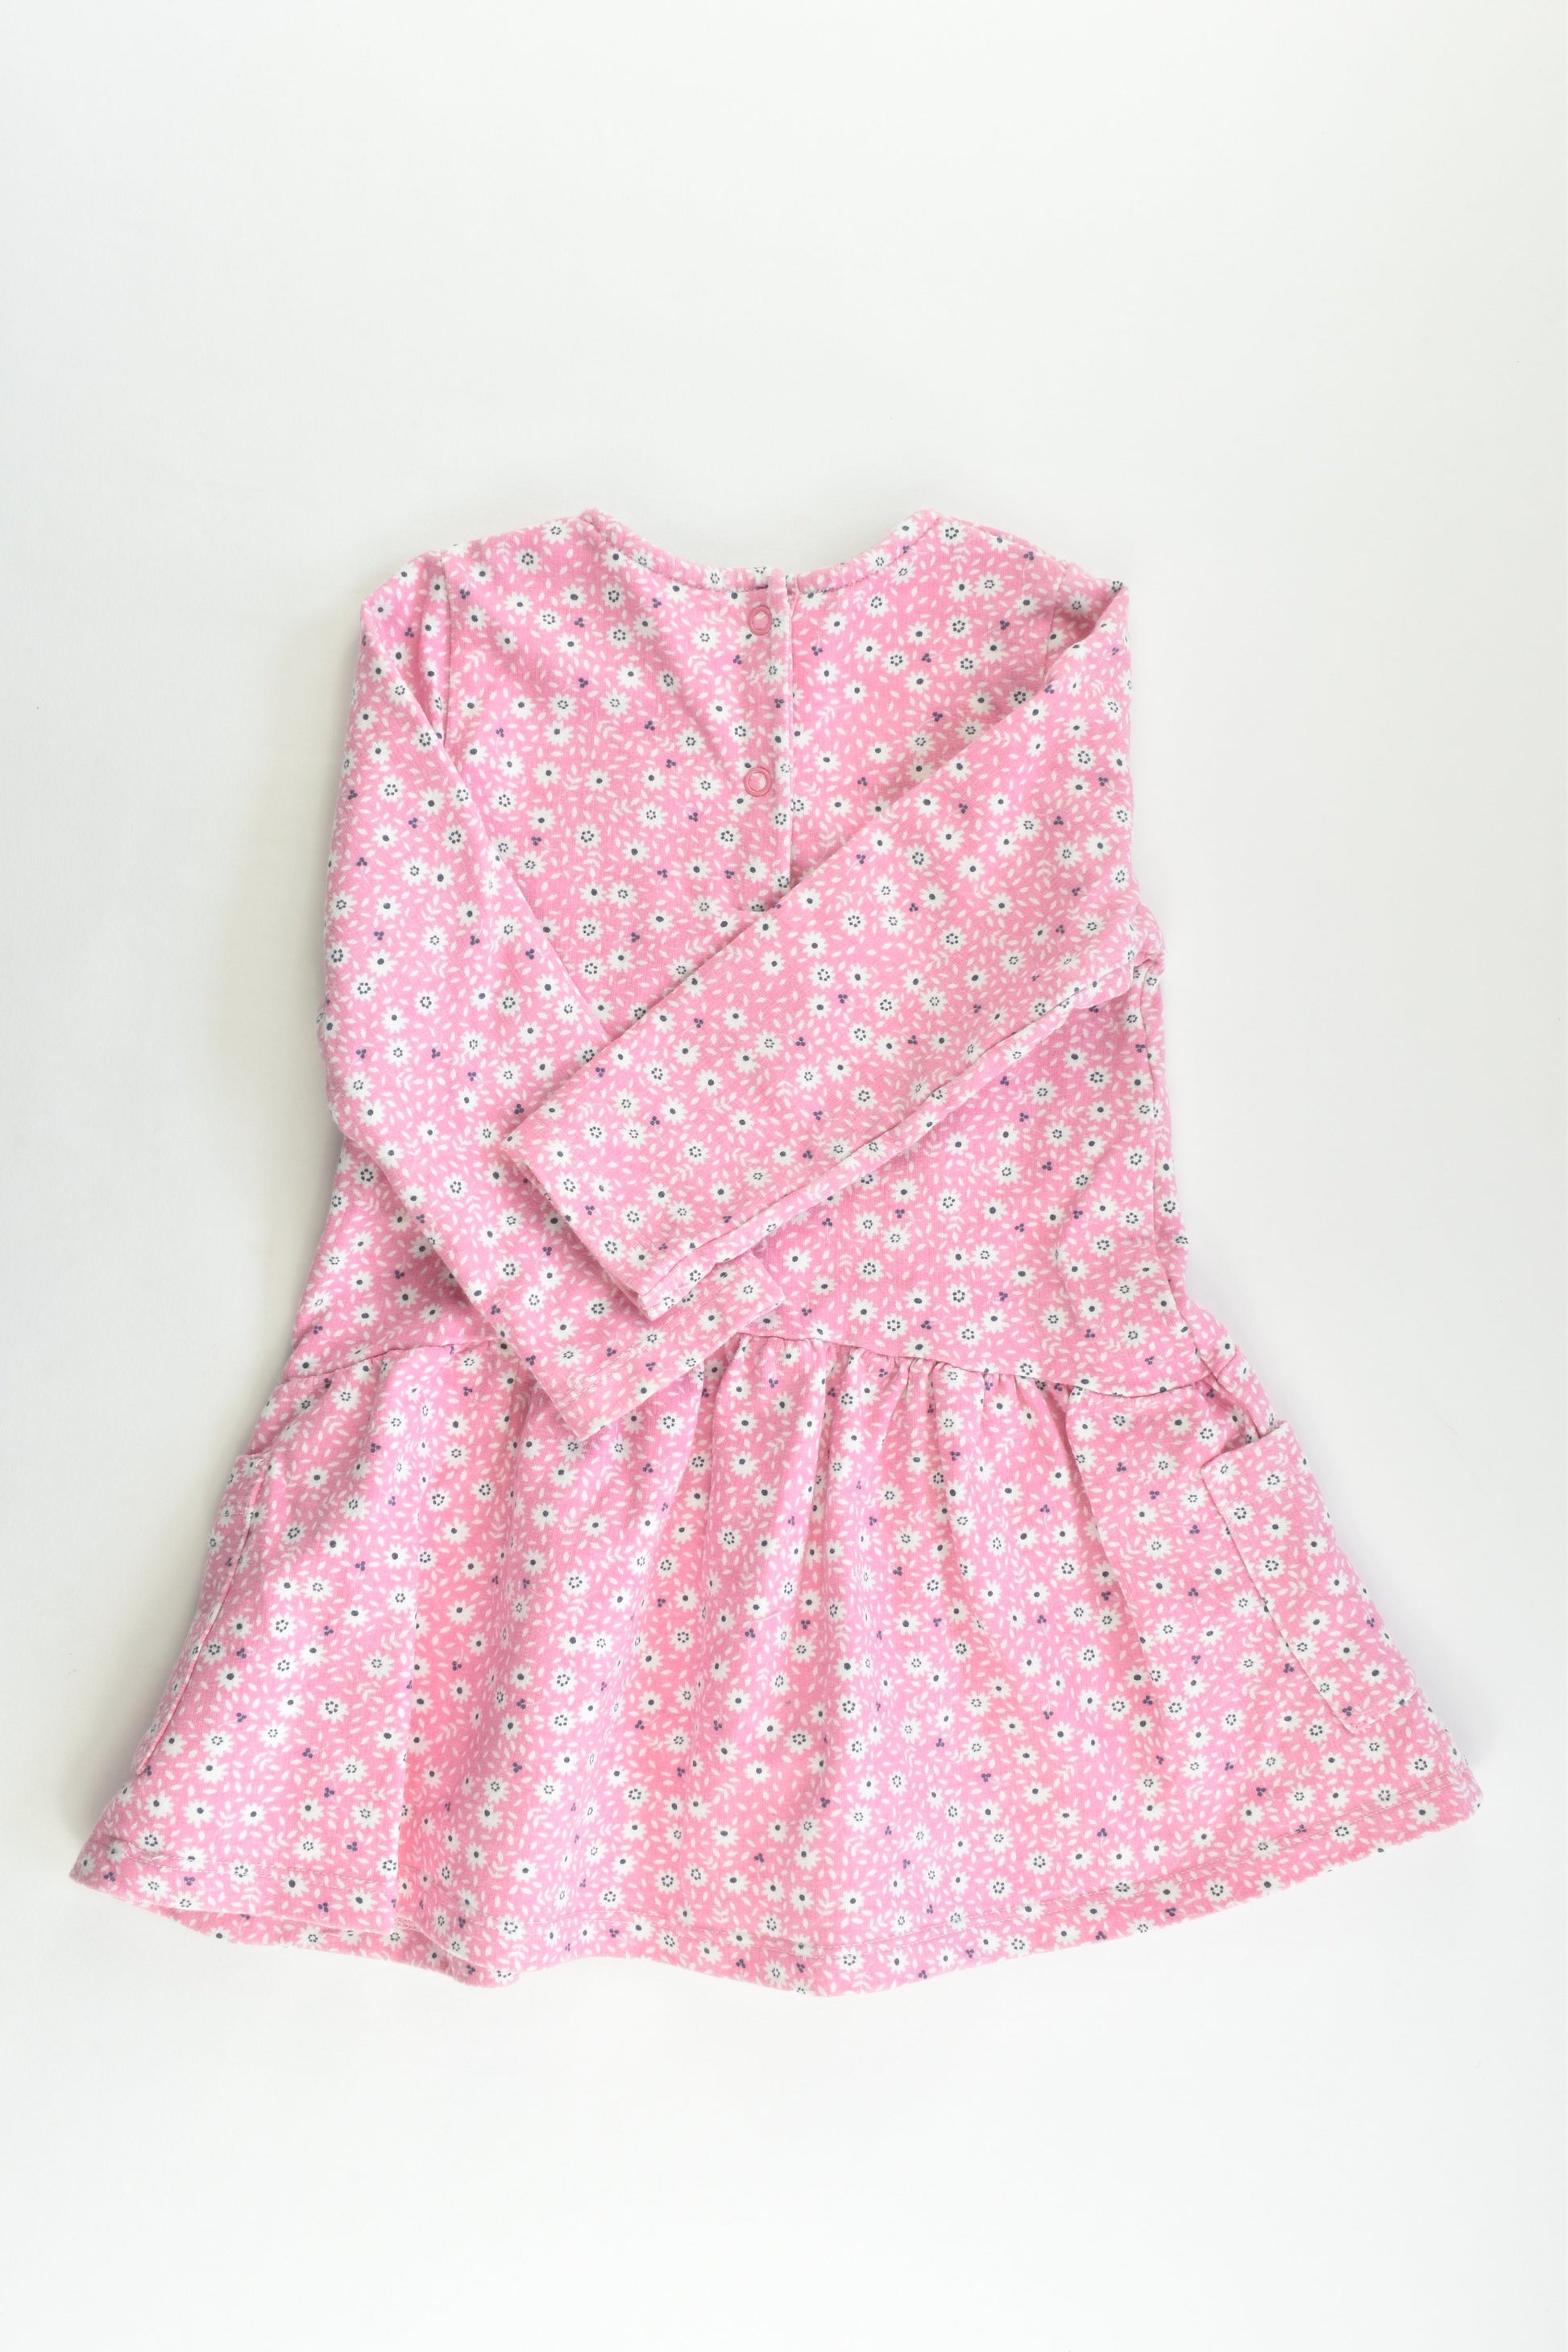 Mothercare Size 1 Floral Sweater Dress